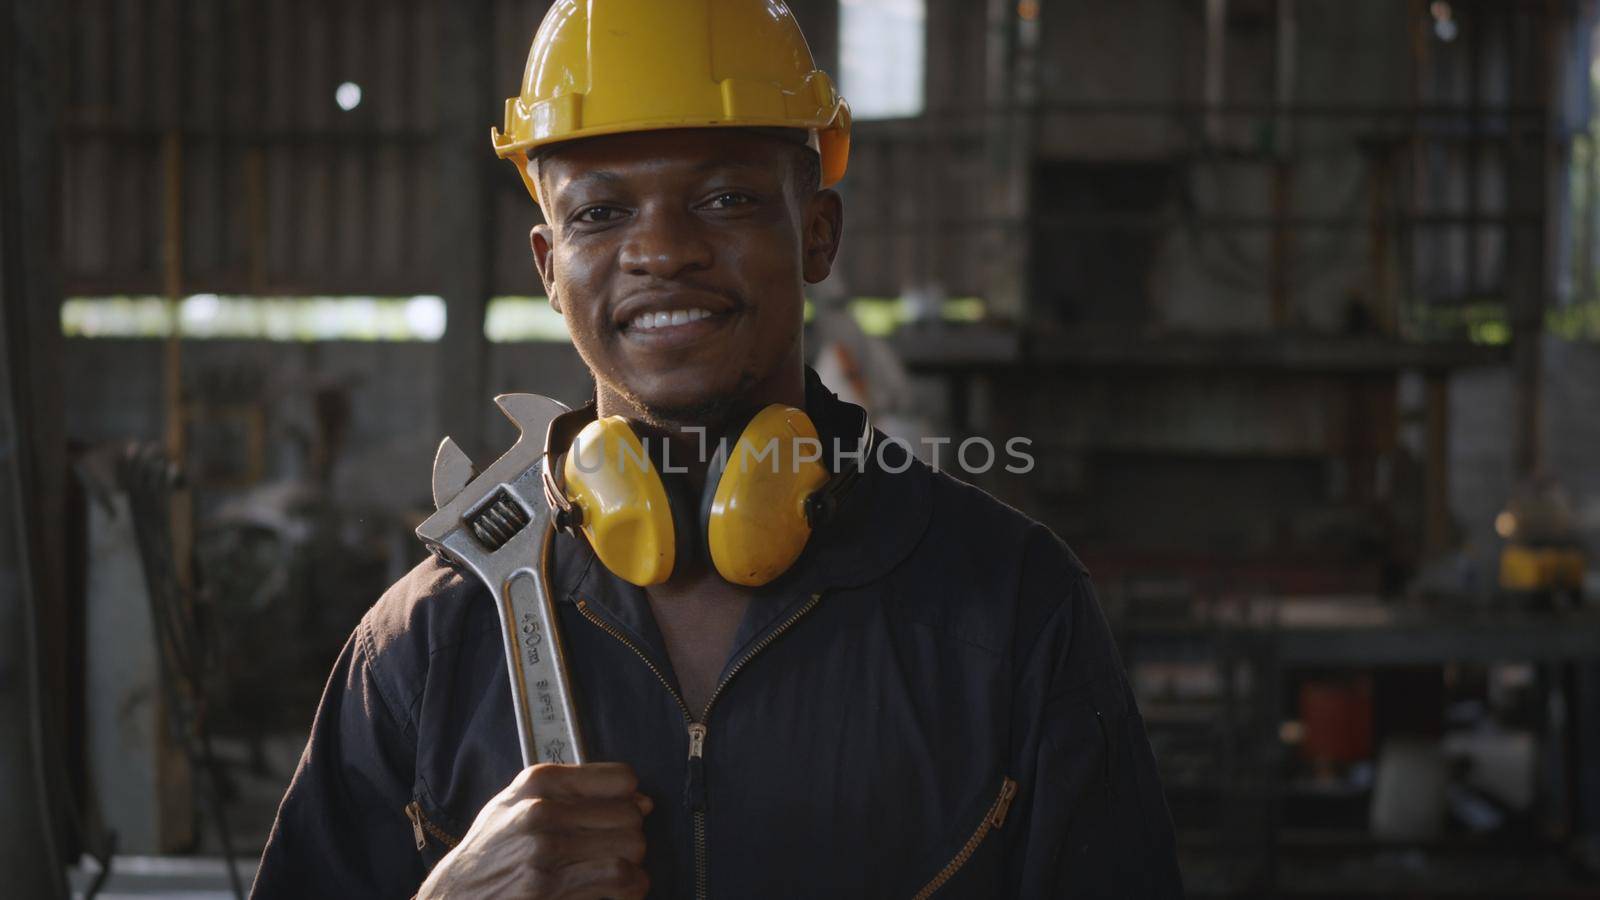 Portrait American industrial black young worker man smiling with helmet and ear protection in front machine, Engineer standing holding wrench on his shoulder at work in industry factory.